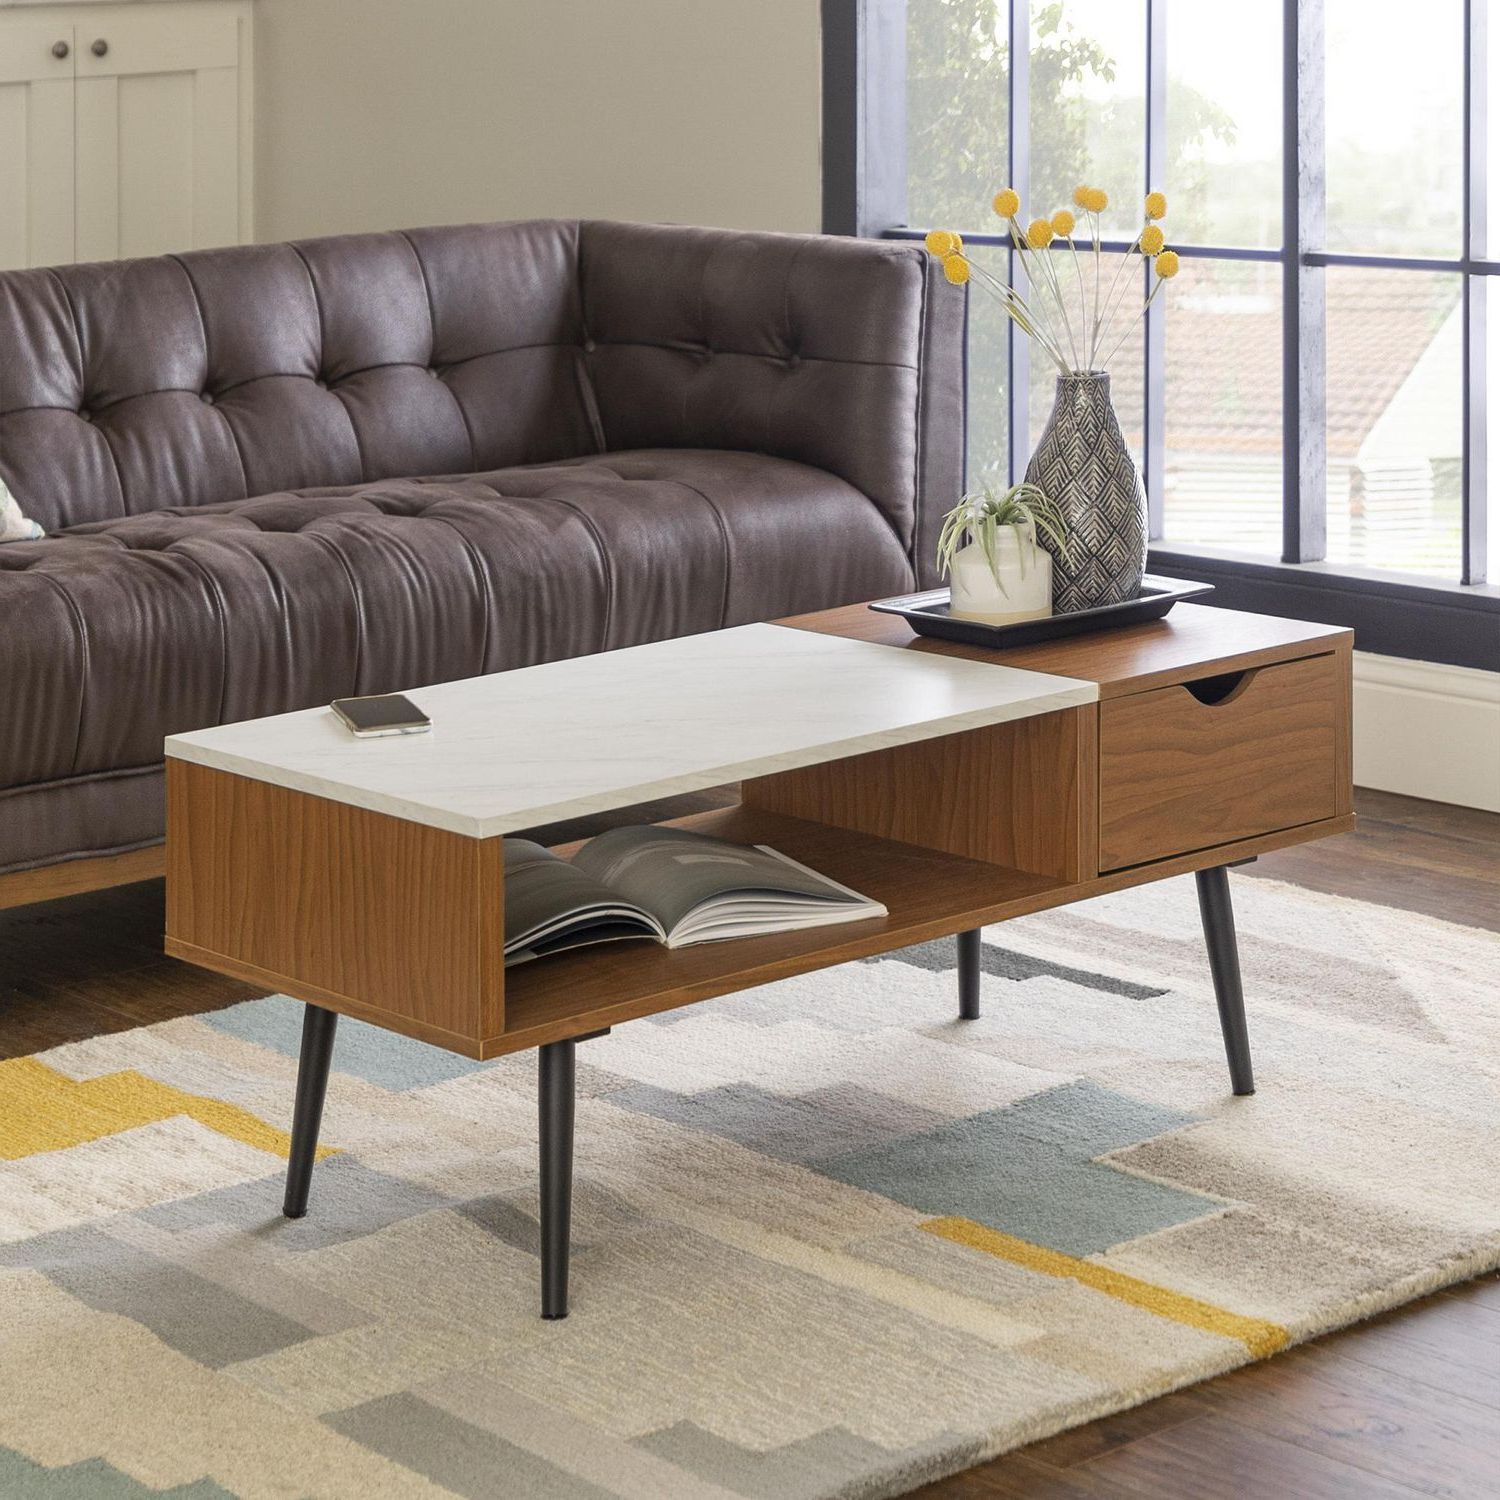 Well Known Manor Park Mid Century Modern Coffee Table With Storage – Multiple In Mid Century Modern Coffee Tables (View 15 of 15)